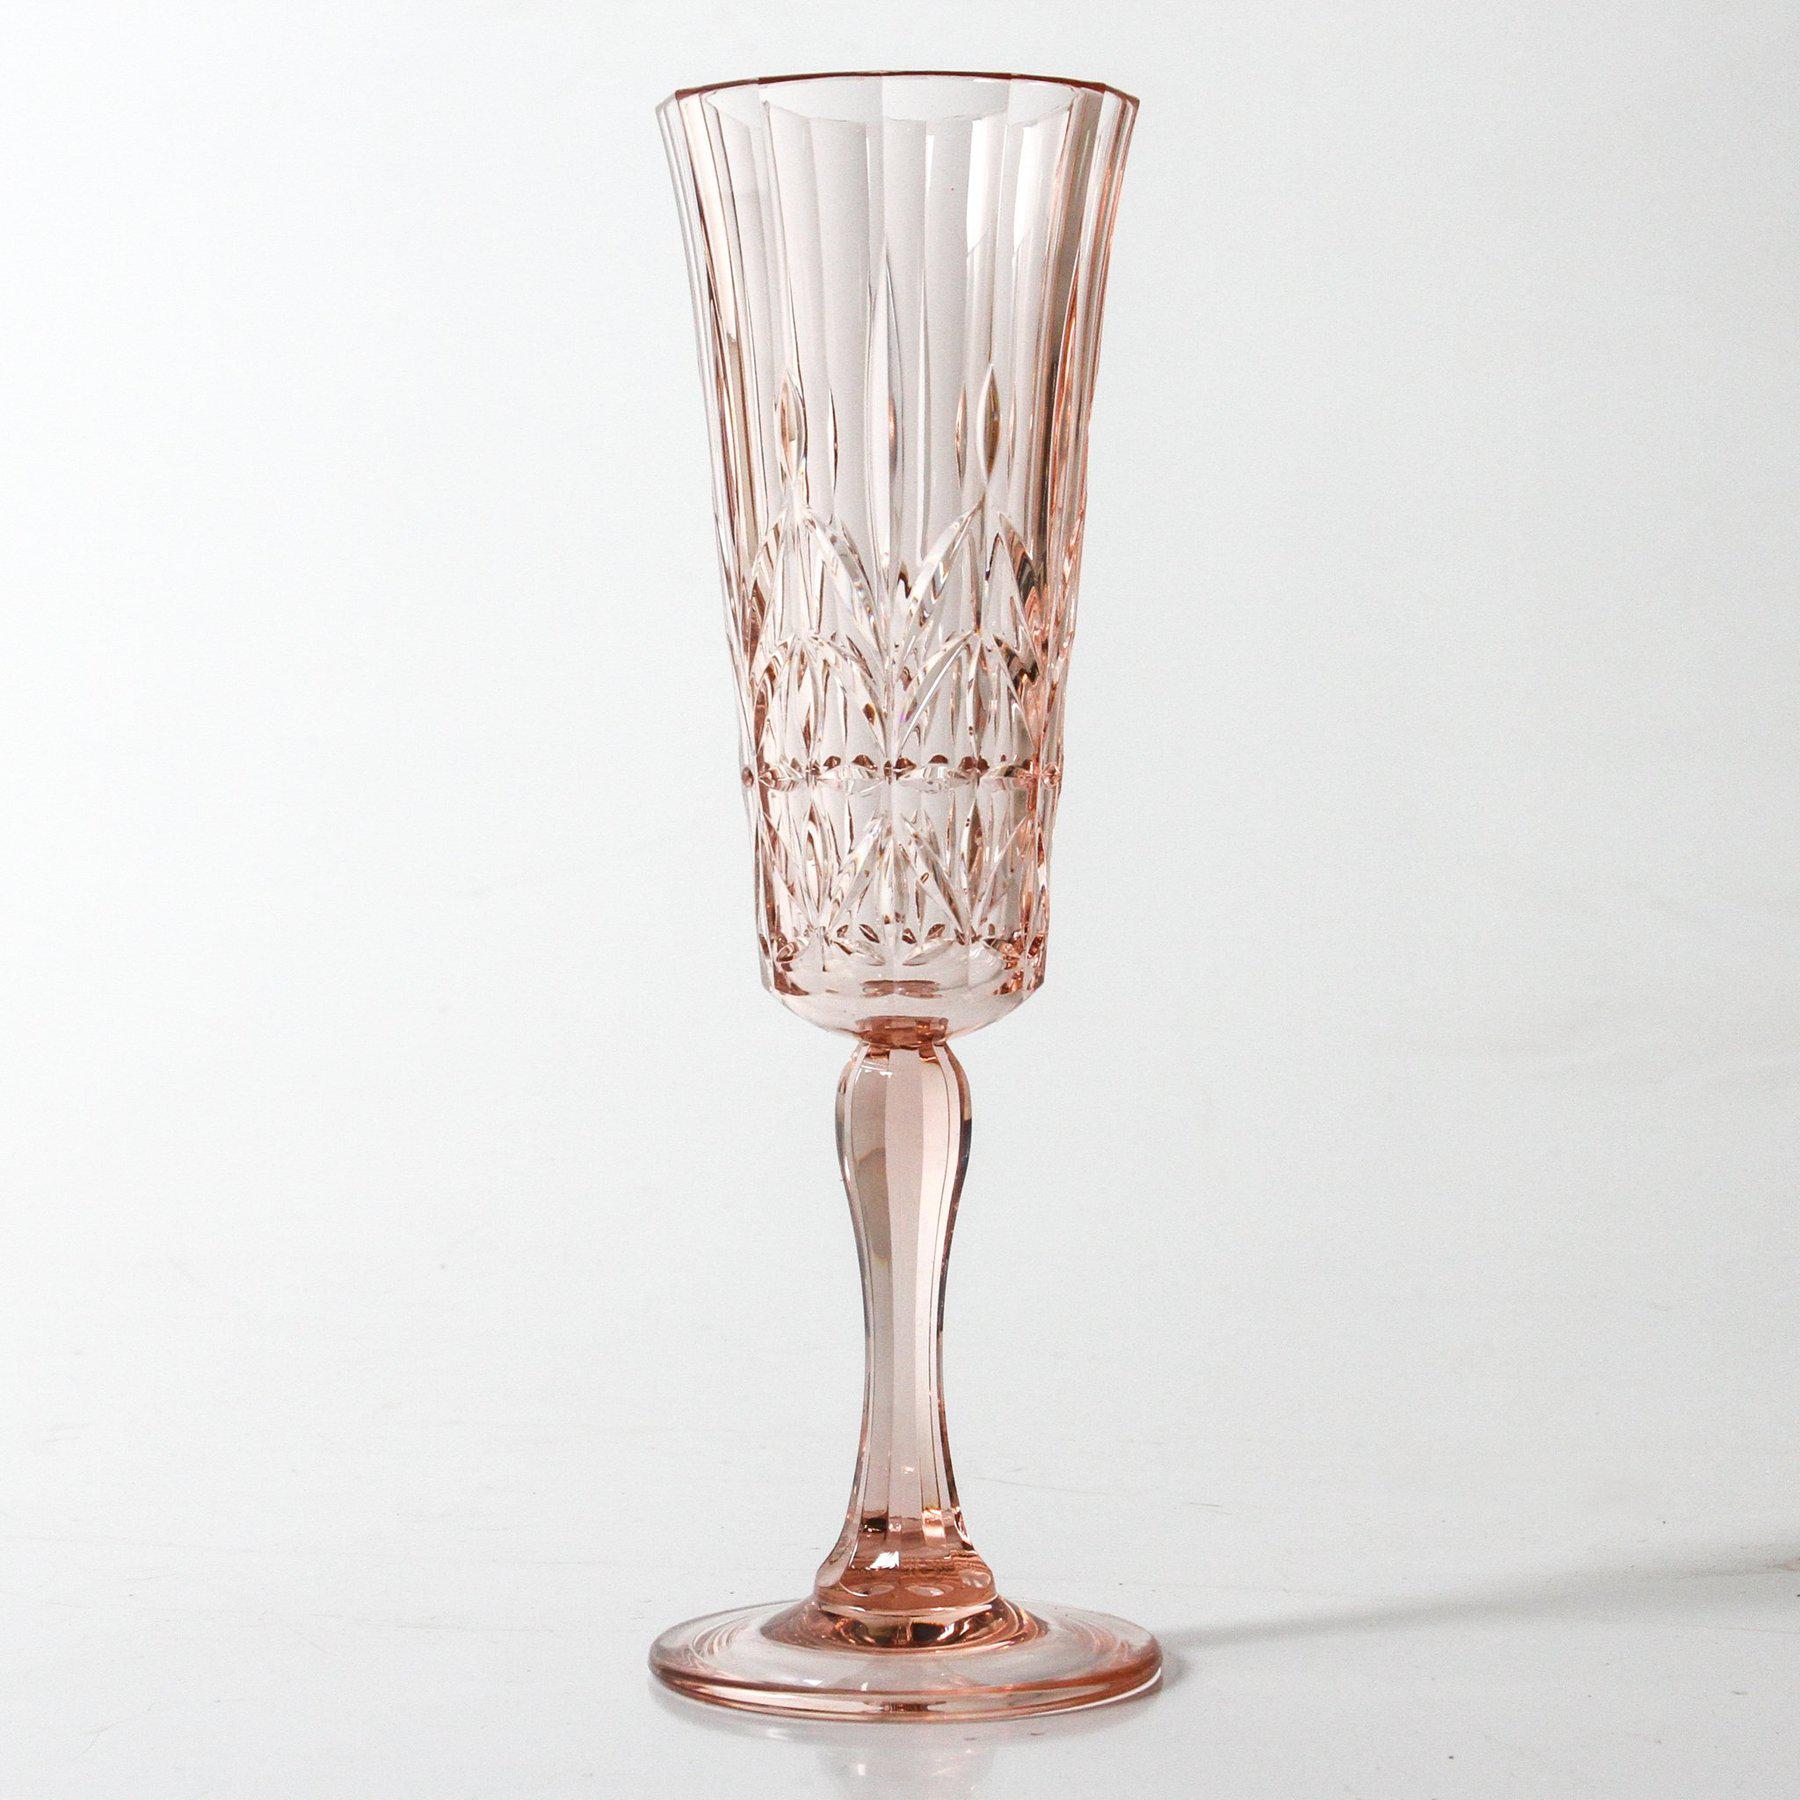 Pavilion Acrylic Champagne Flute - Pale Pink-Dining & Entertaining-Indigo Love-The Bay Room